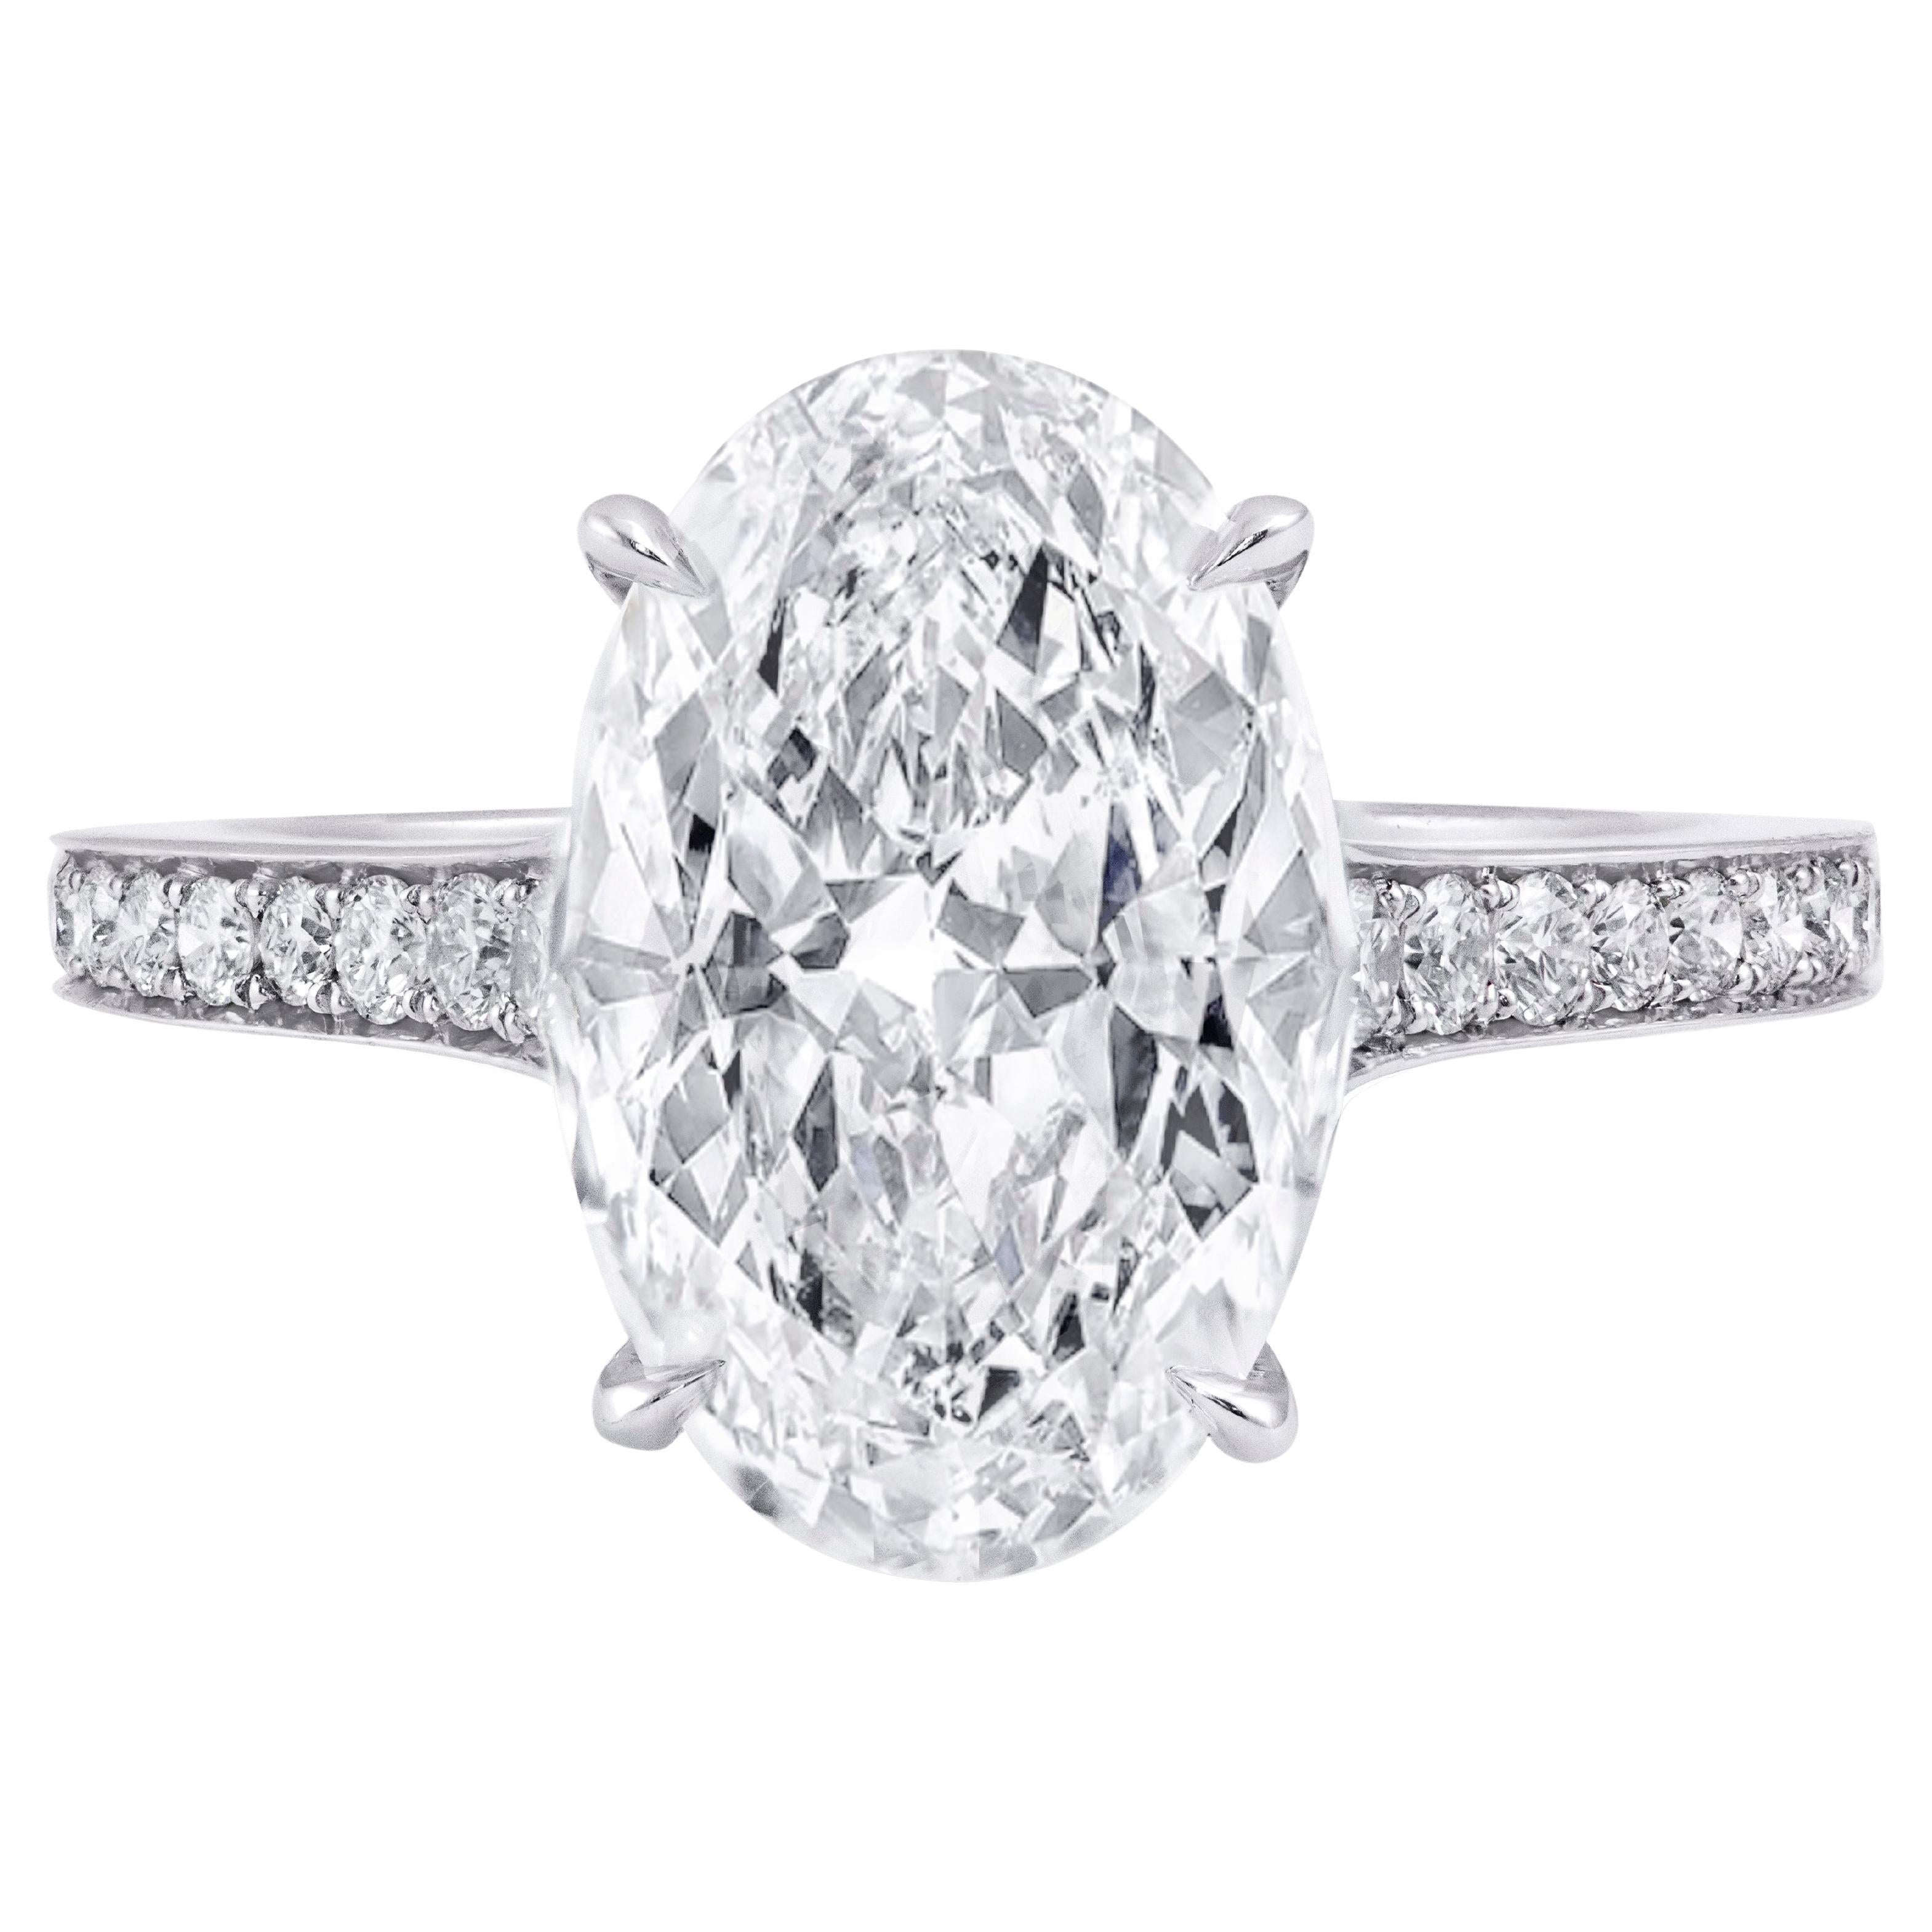 GIA Certified 3.0 Carats Oval Cut Diamond Engagement Ring with side stones